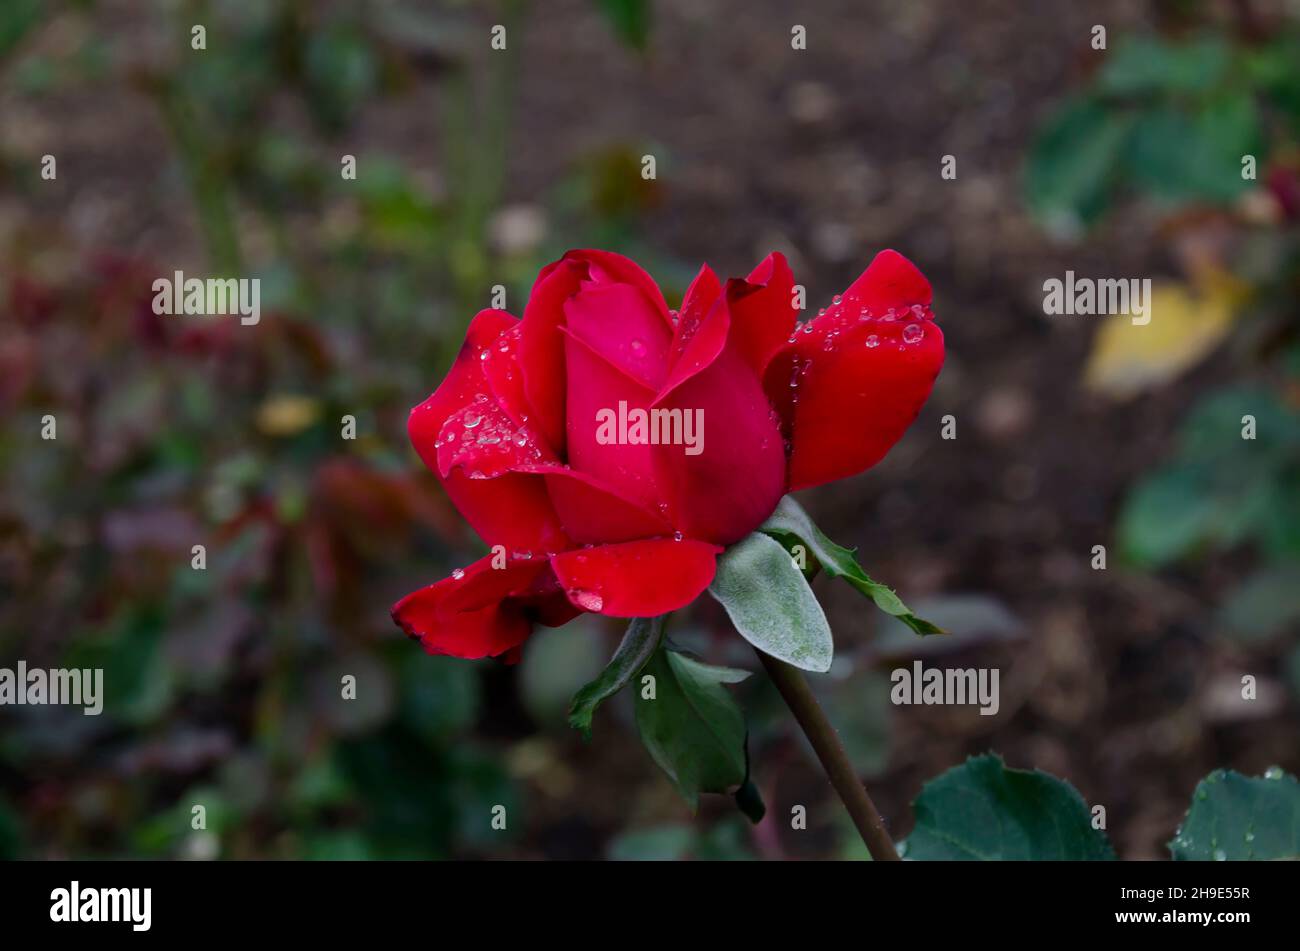 Flowering rose bush in the garden with red flowers covered with ...